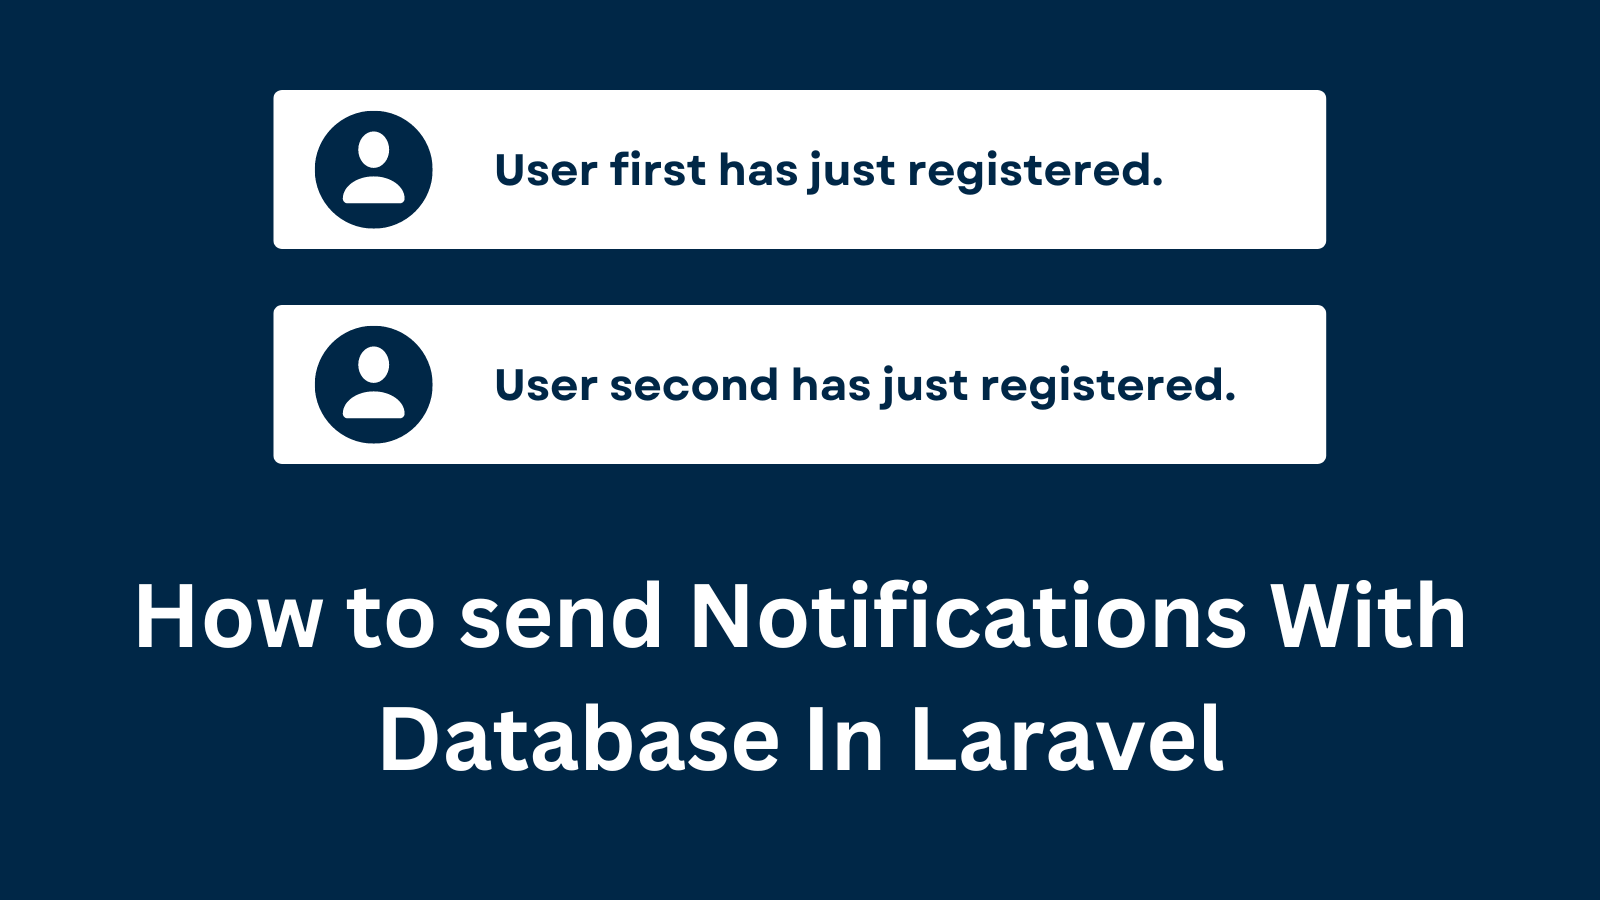 How to send Notifications With Database In Laravel